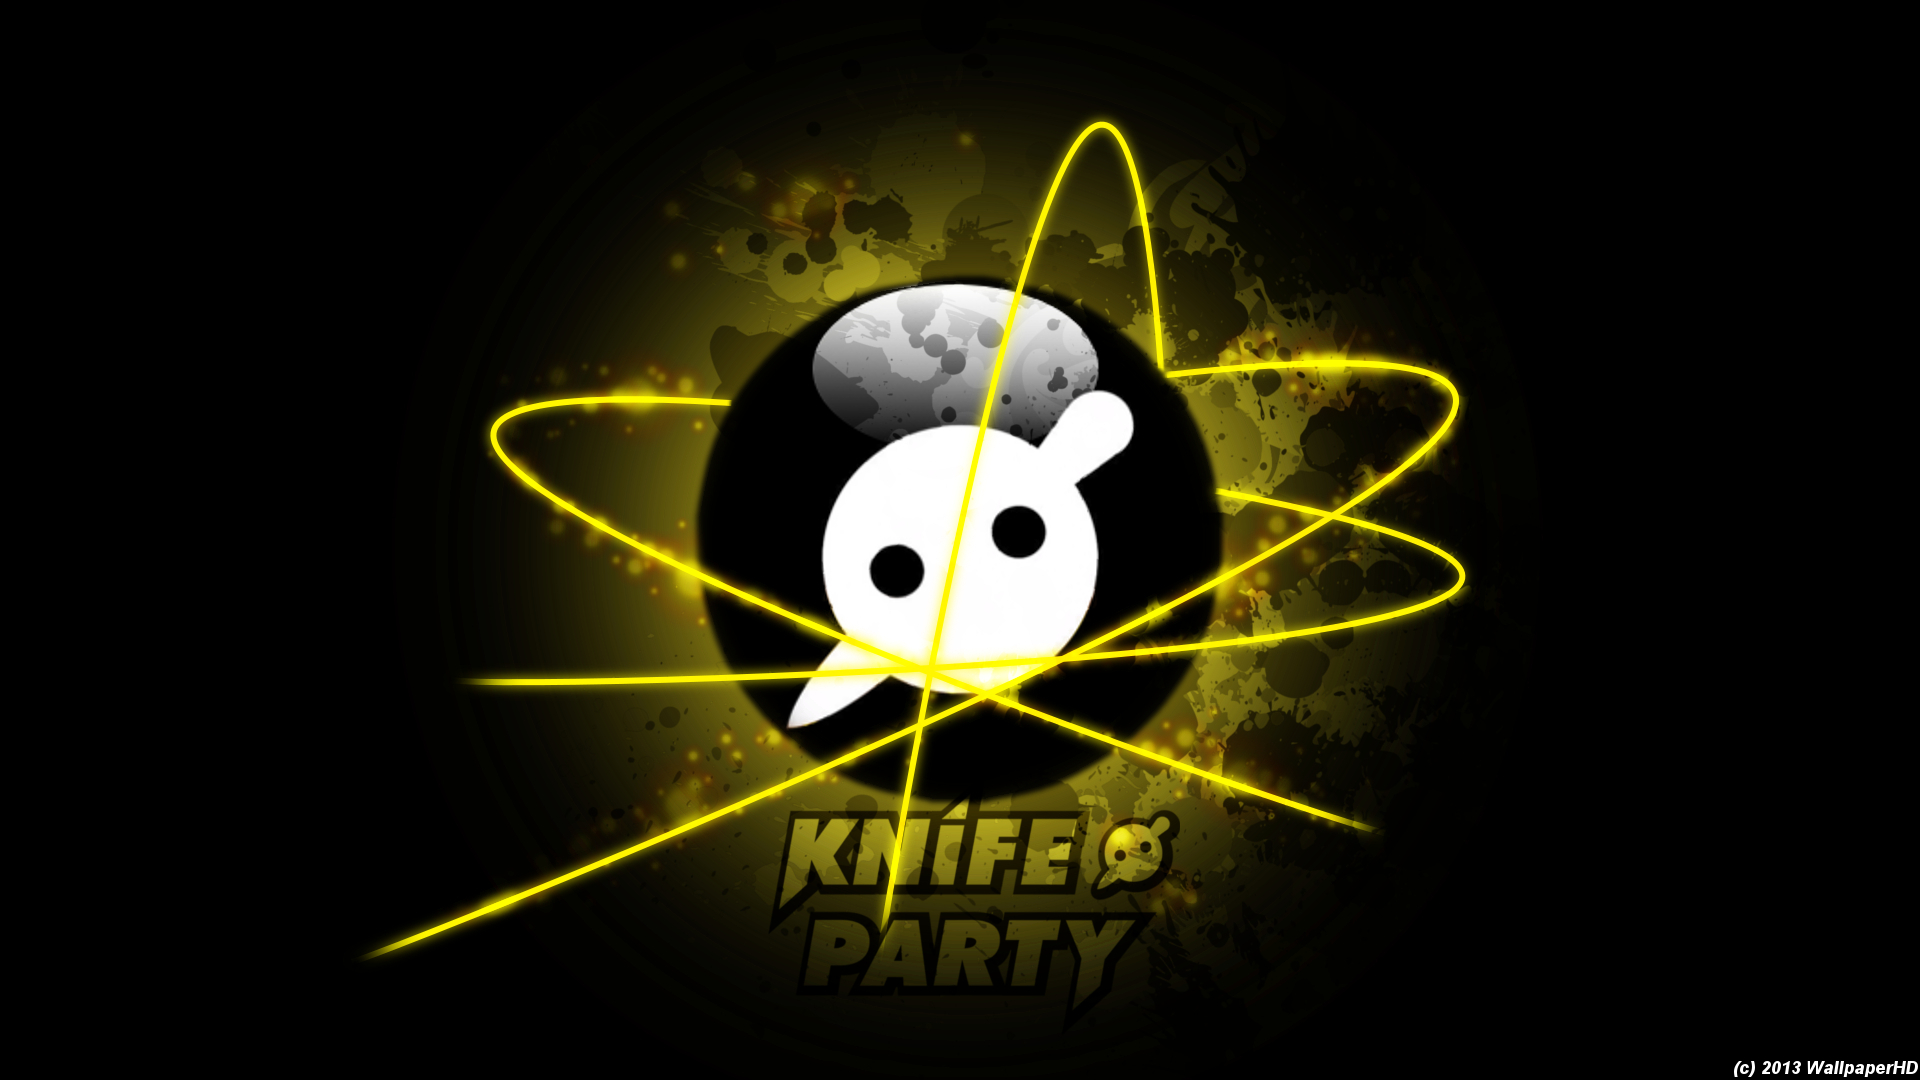 Knife Party Wallpaper1 By WallpaperHD